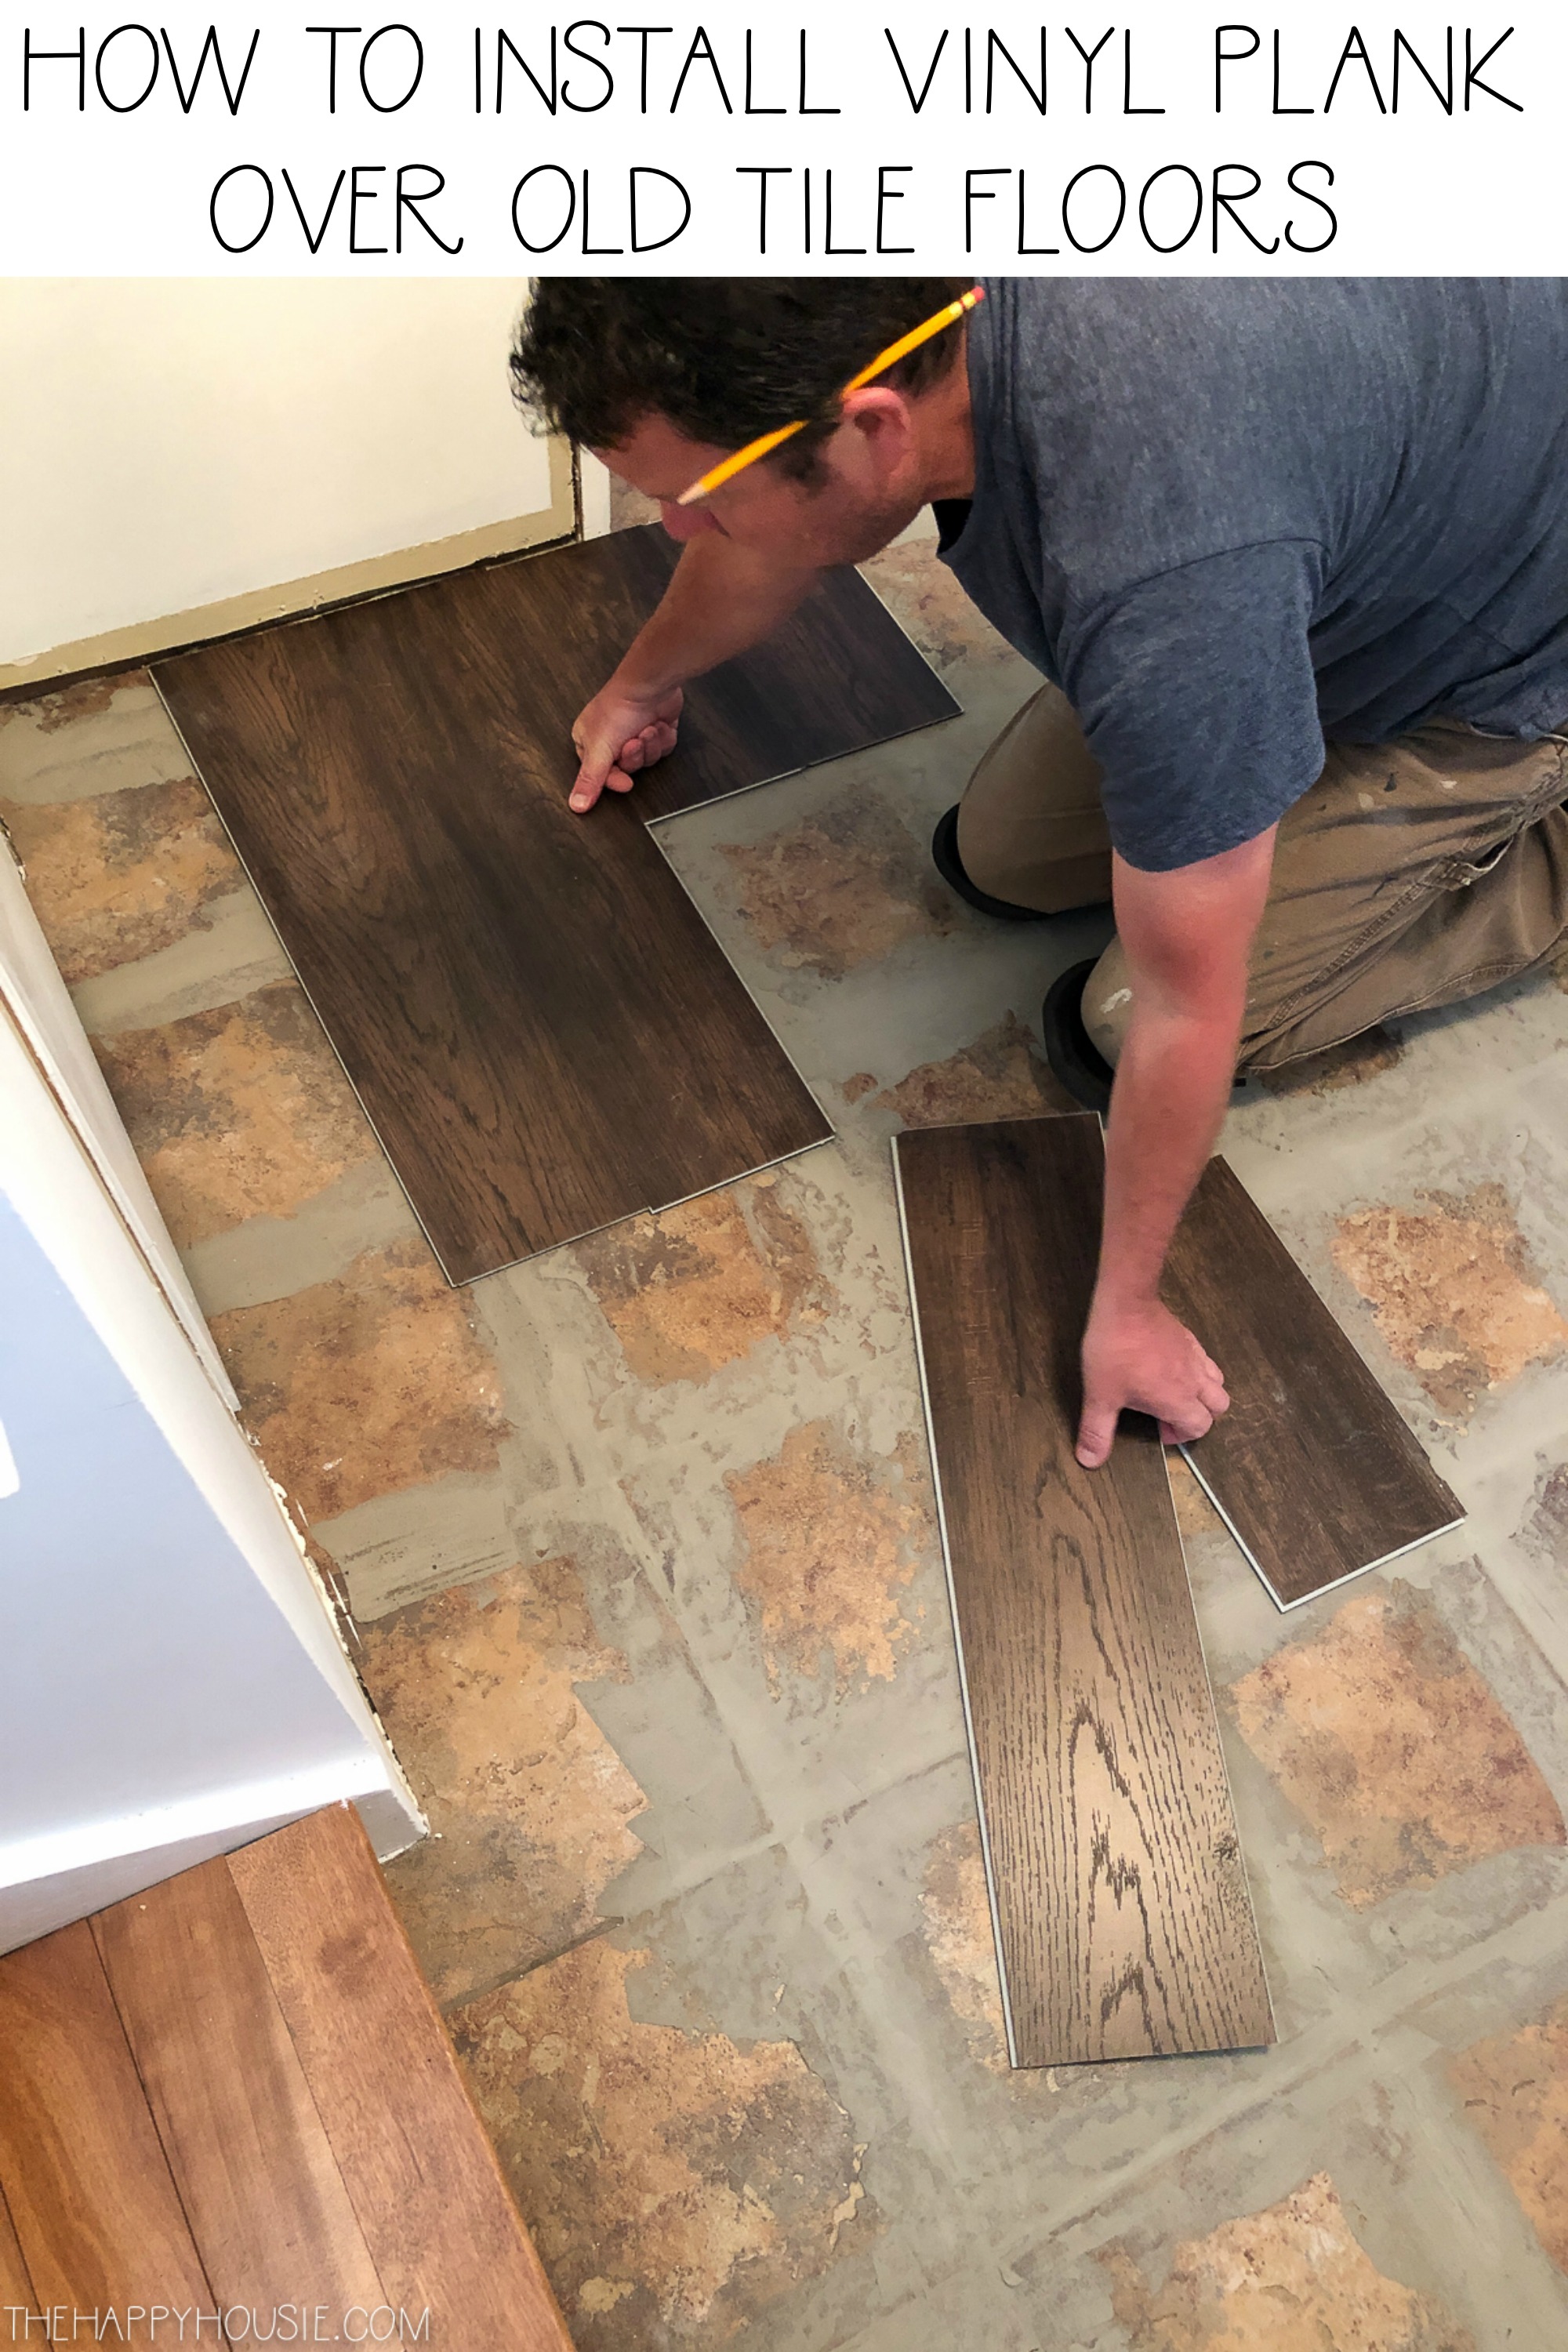 Install Vinyl Plank Over Tile Floors, What Type Of Flooring Can You Put Over Ceramic Tile Uk